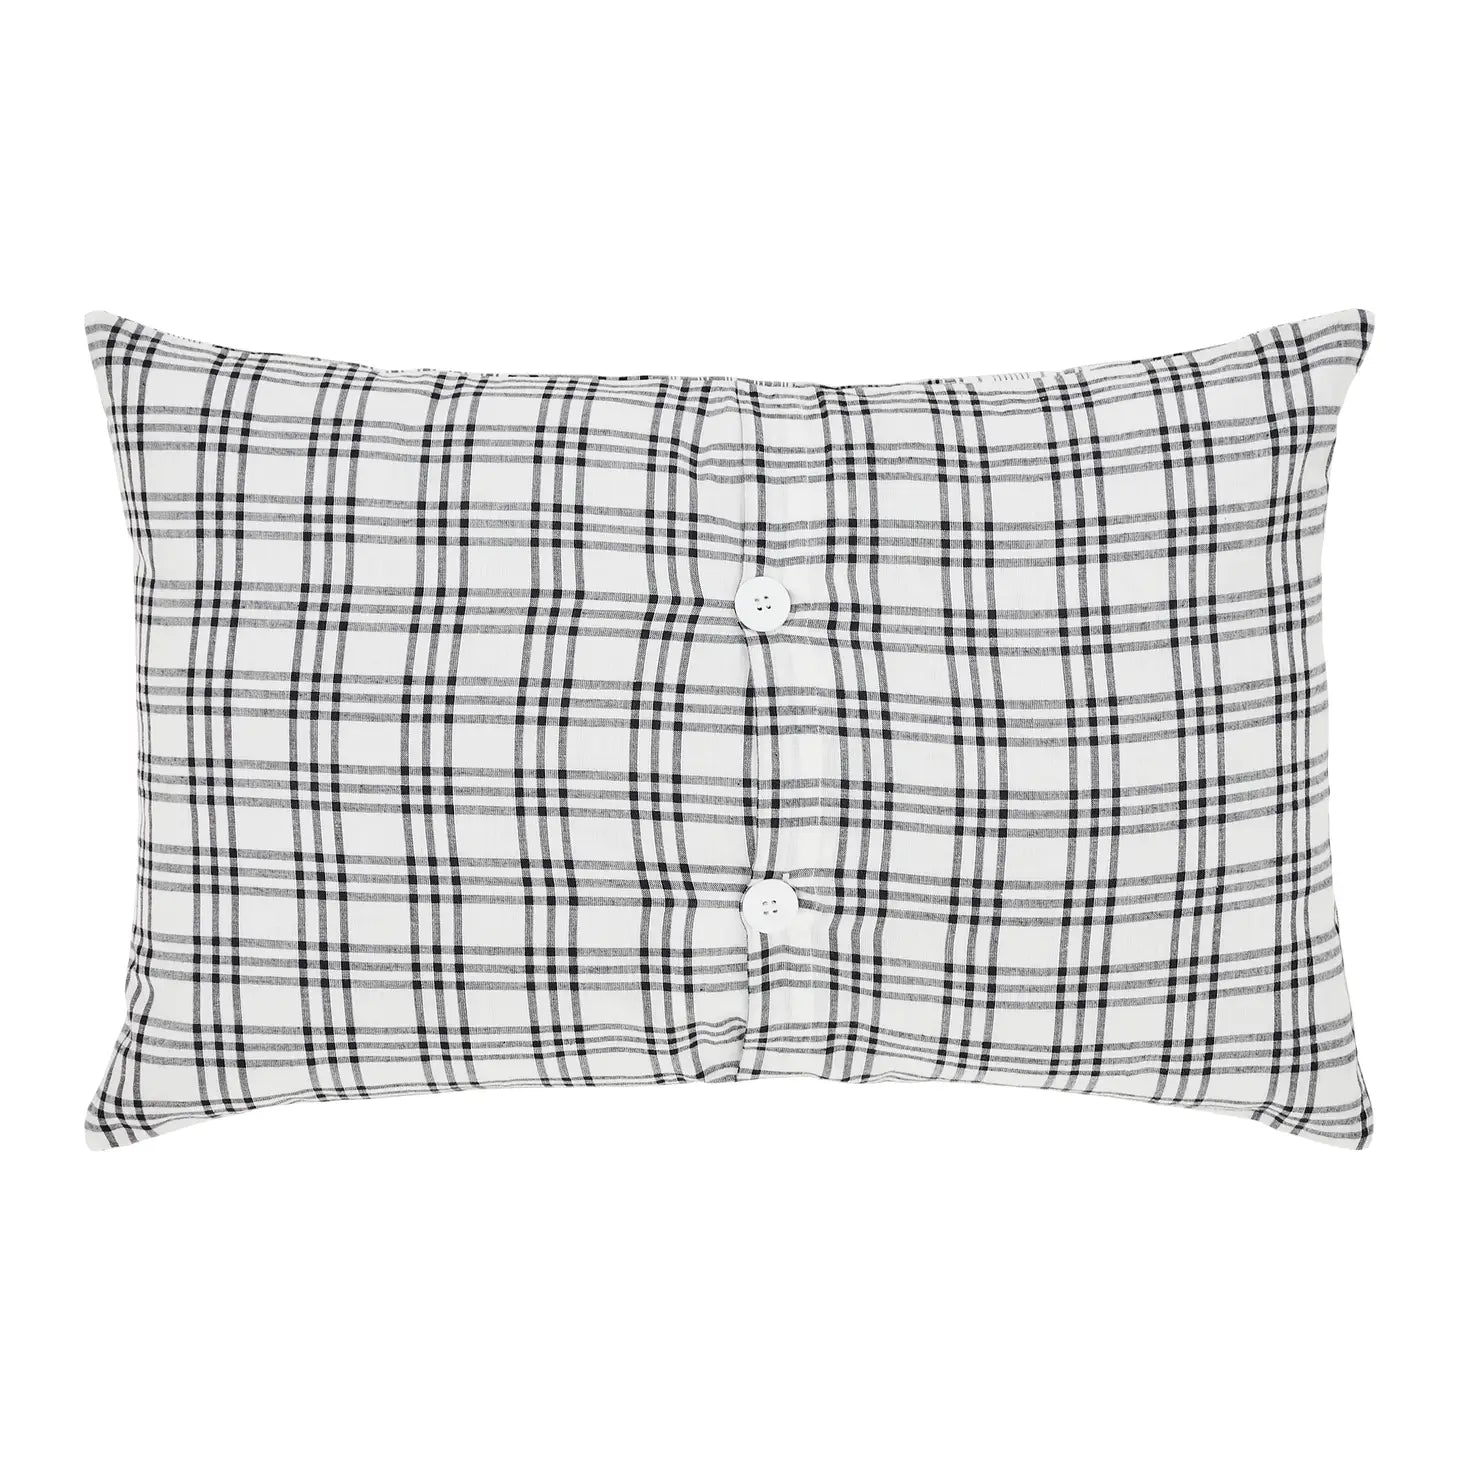 Sawyer Mill Farmstead Pillow - The Mirrored Past